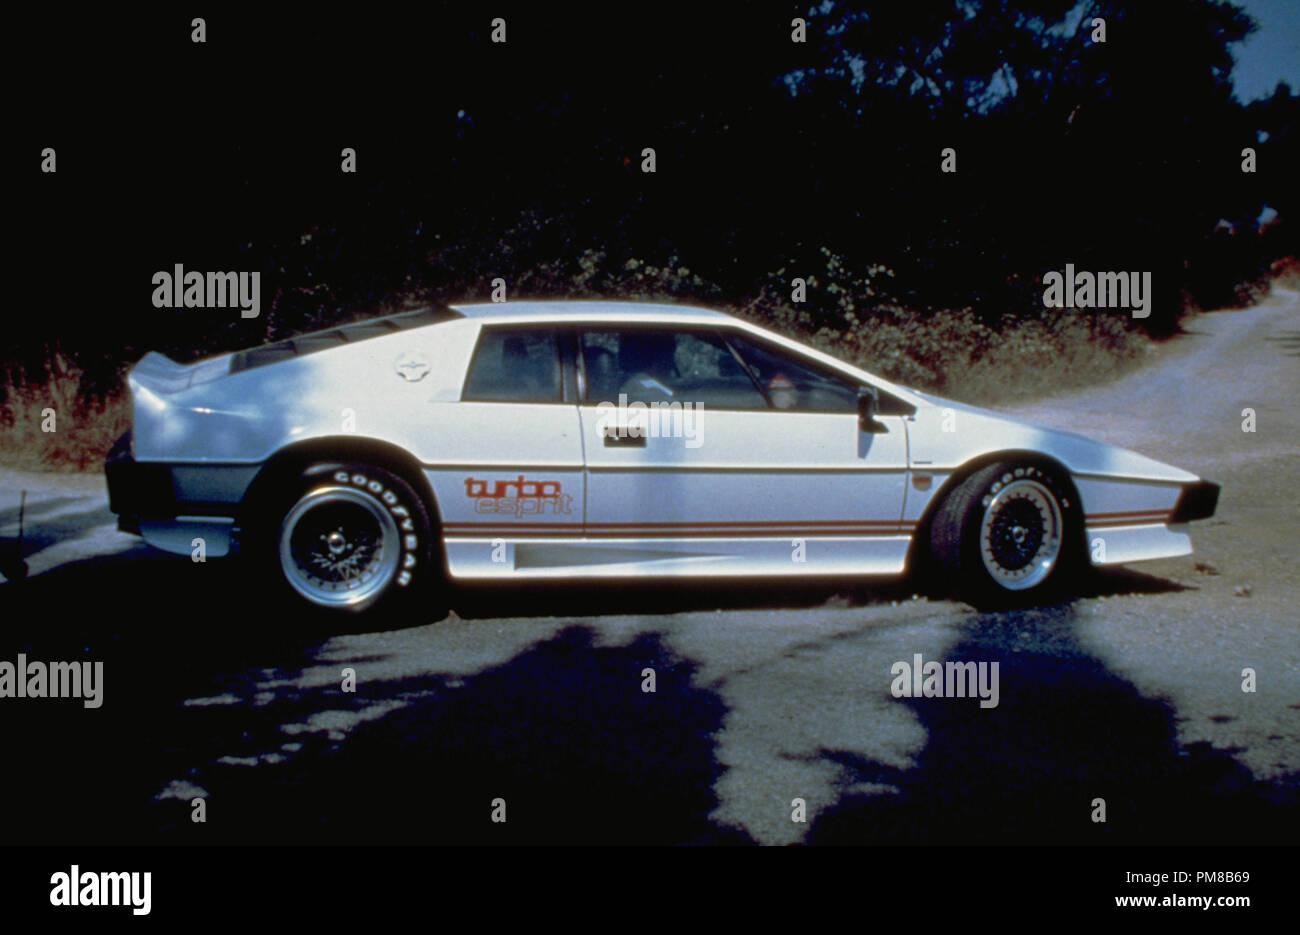 Studio Werbung immer noch: "For Your Eyes Only' Lotus Esprit Turbo 1981 UA Stockfoto